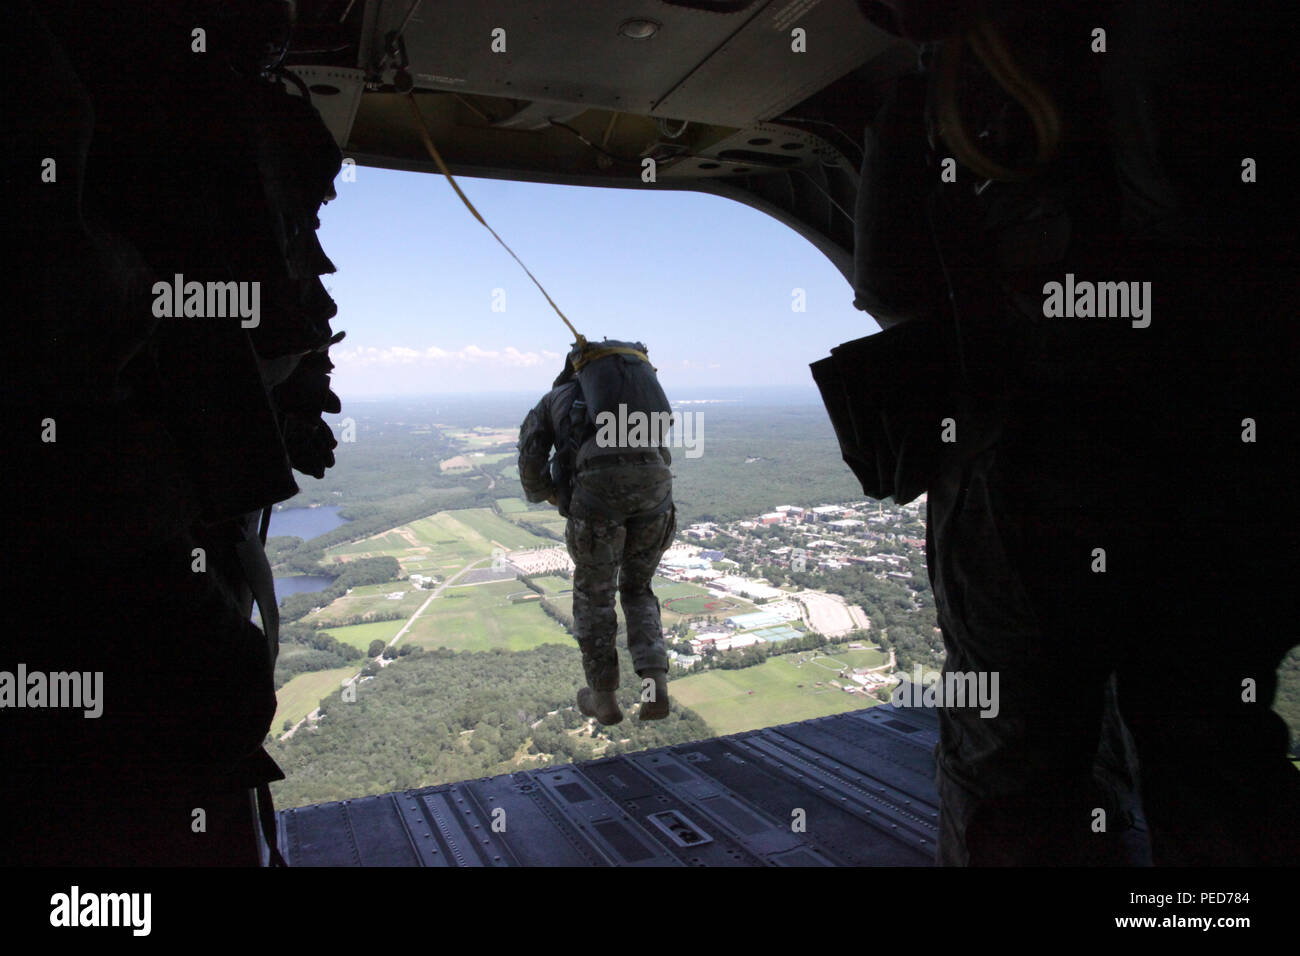 A U.S. Army paratrooper jumps from a CH-47 Chinook helicopter during the wing exchange at Leapfest in West Kingston, R.I., Aug. 3, 2015. Leapfest is an International parachute competition hosted by the 56th Troop Command, Rhode Island National Guard to promote high level technical training and esprit de corps within the International Airborne community. (U.S. Army Photo by Spc. Josephine Carlson/Released) Stock Photo